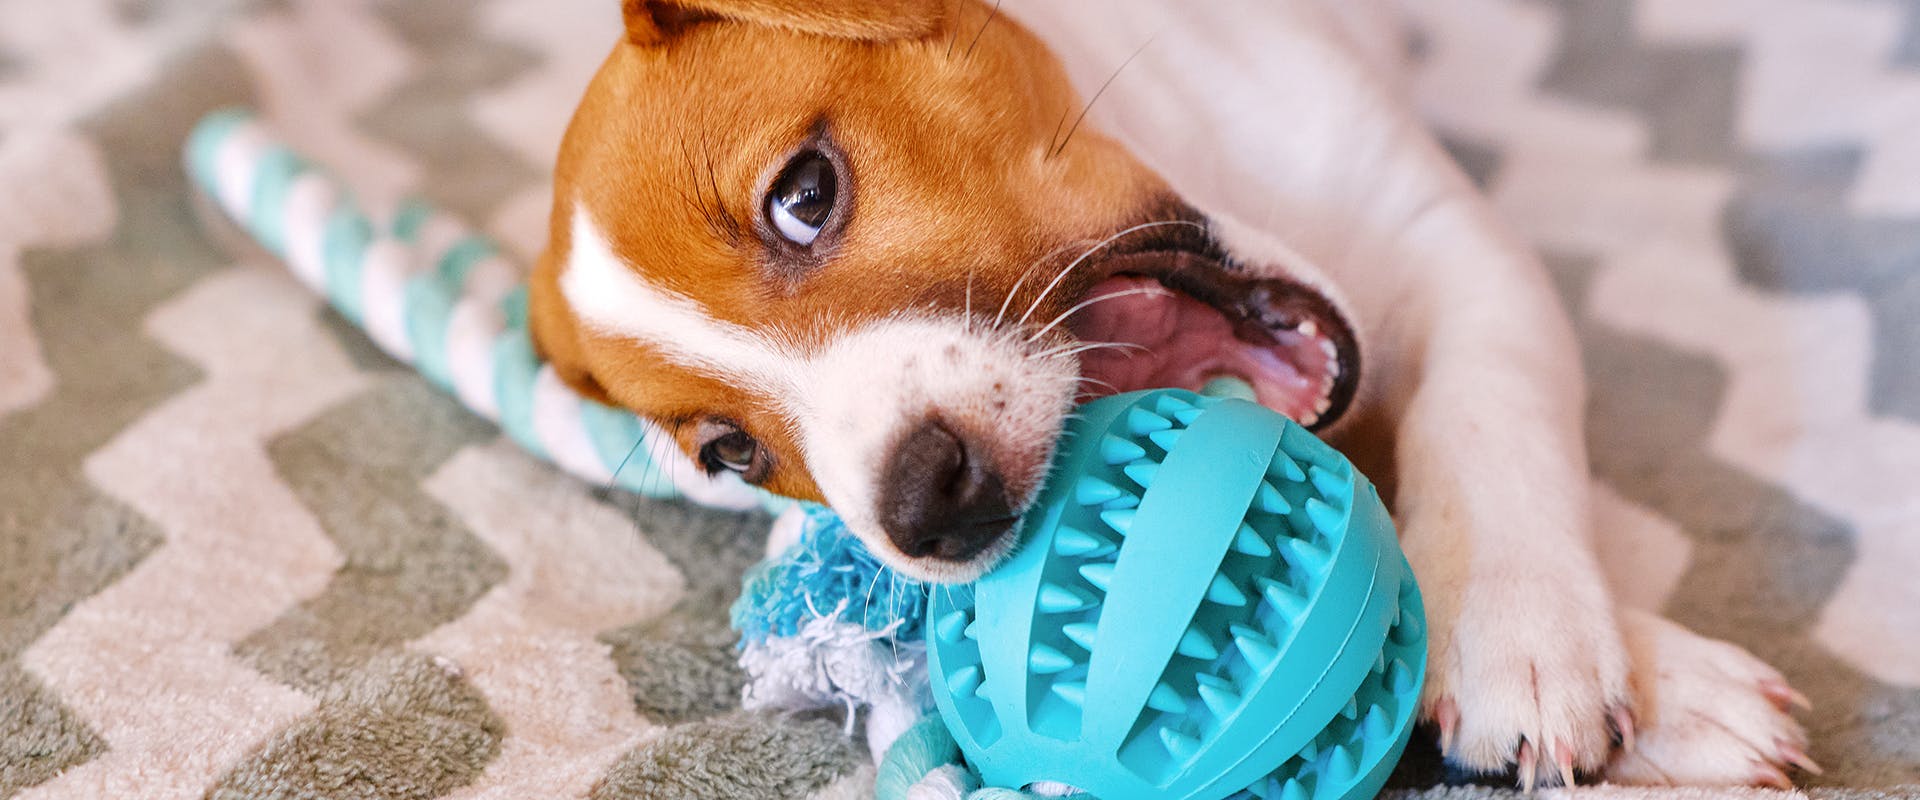 A cute Jack Russell puppy laying on the floor, playfully biting a bright blue chew toy